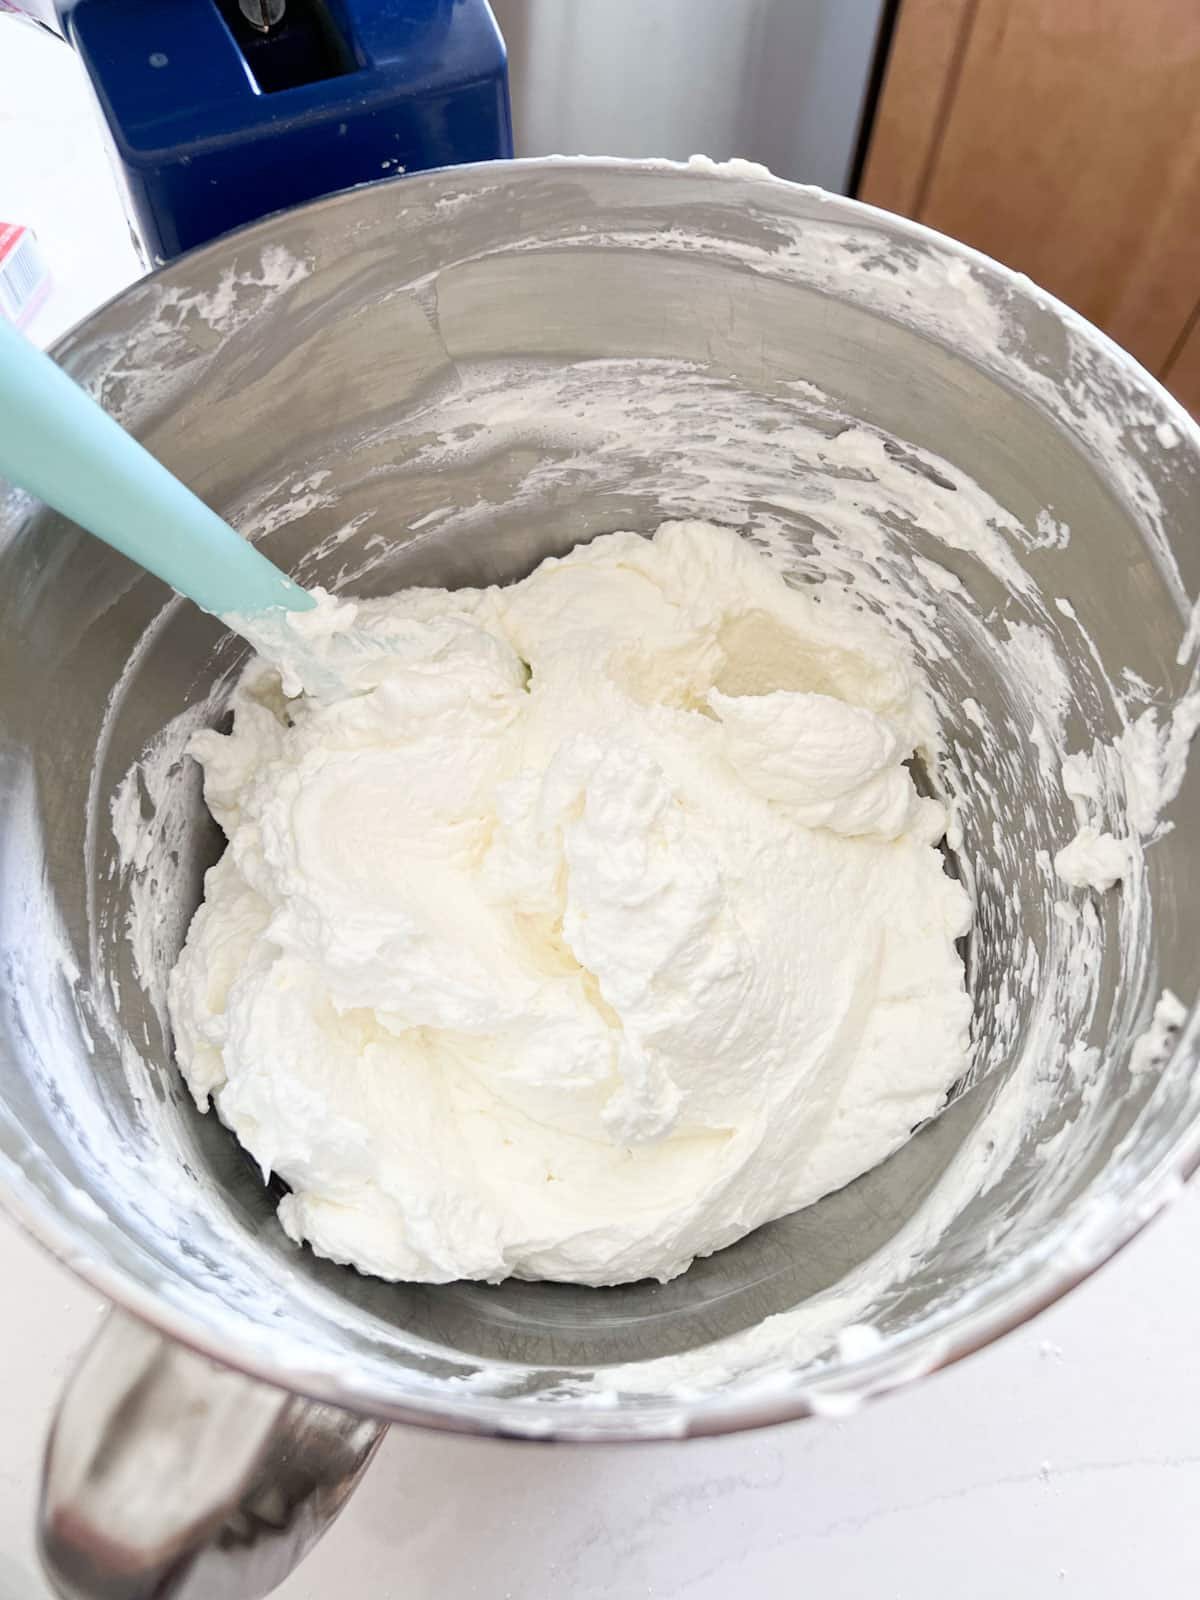 The bream cheese mixture after the whipped cream is folded into it and well combined.